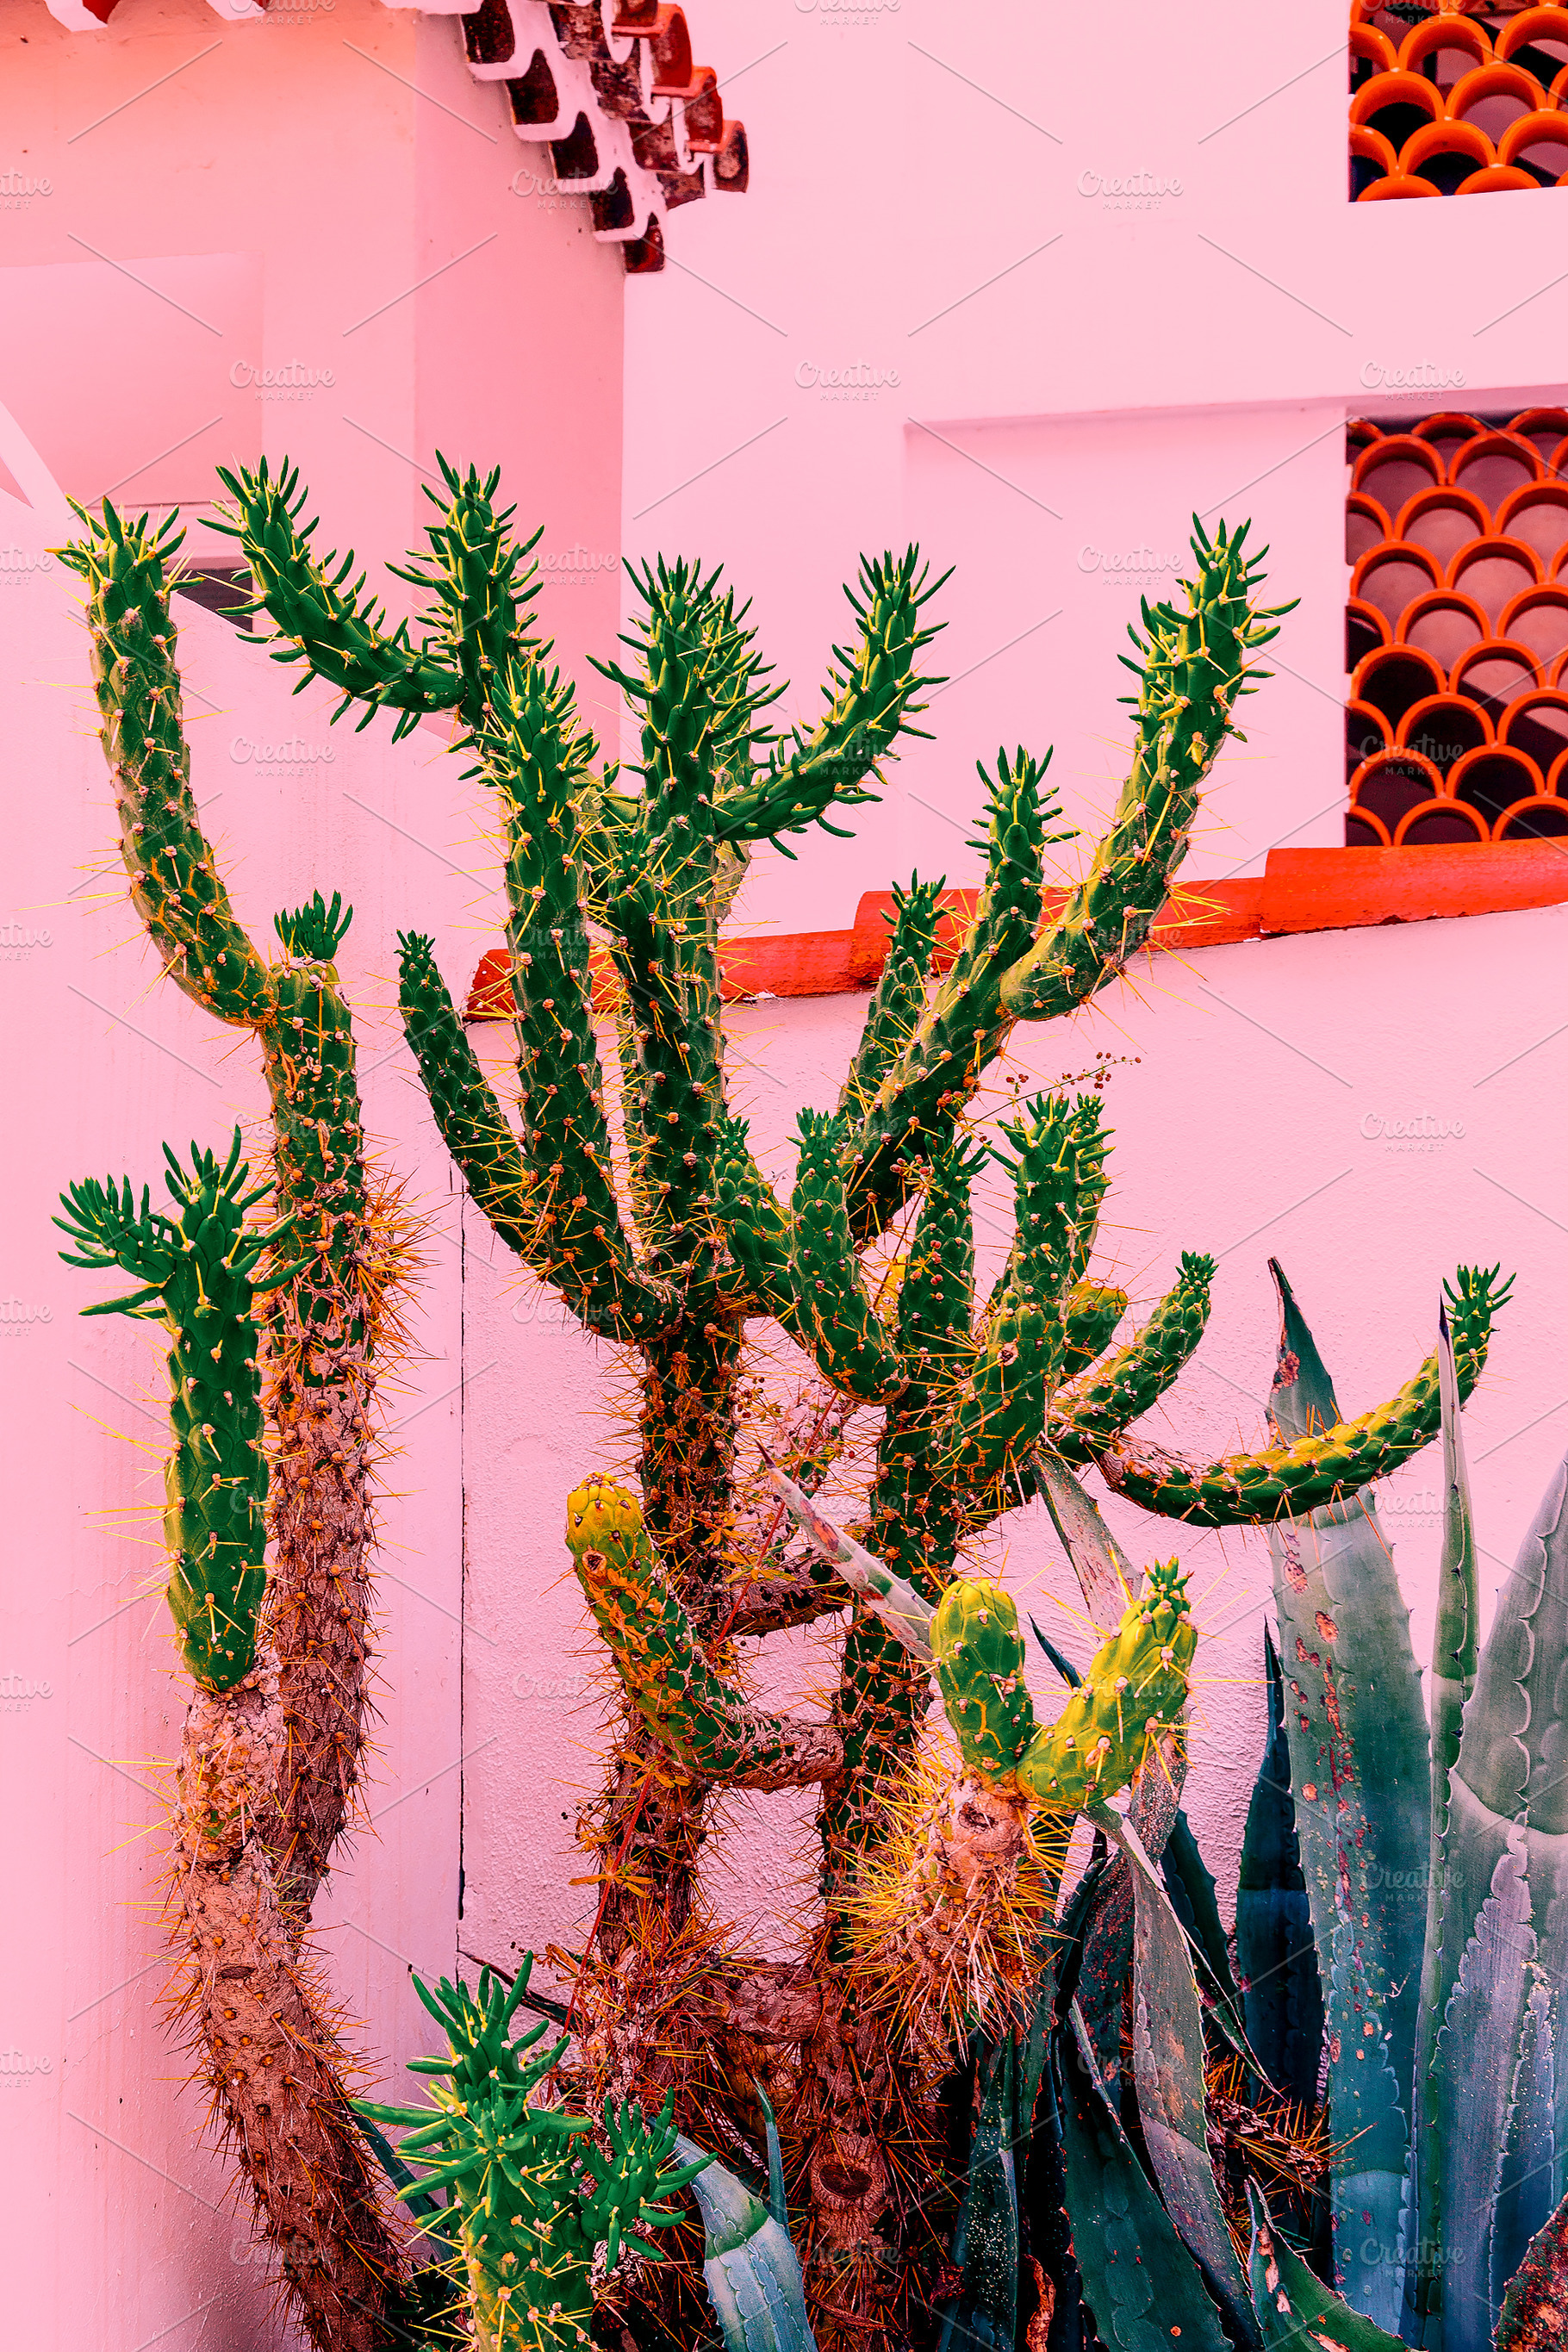 Cacti on pink. Plants on pink concep ~ Beauty & Fashion Photos ...